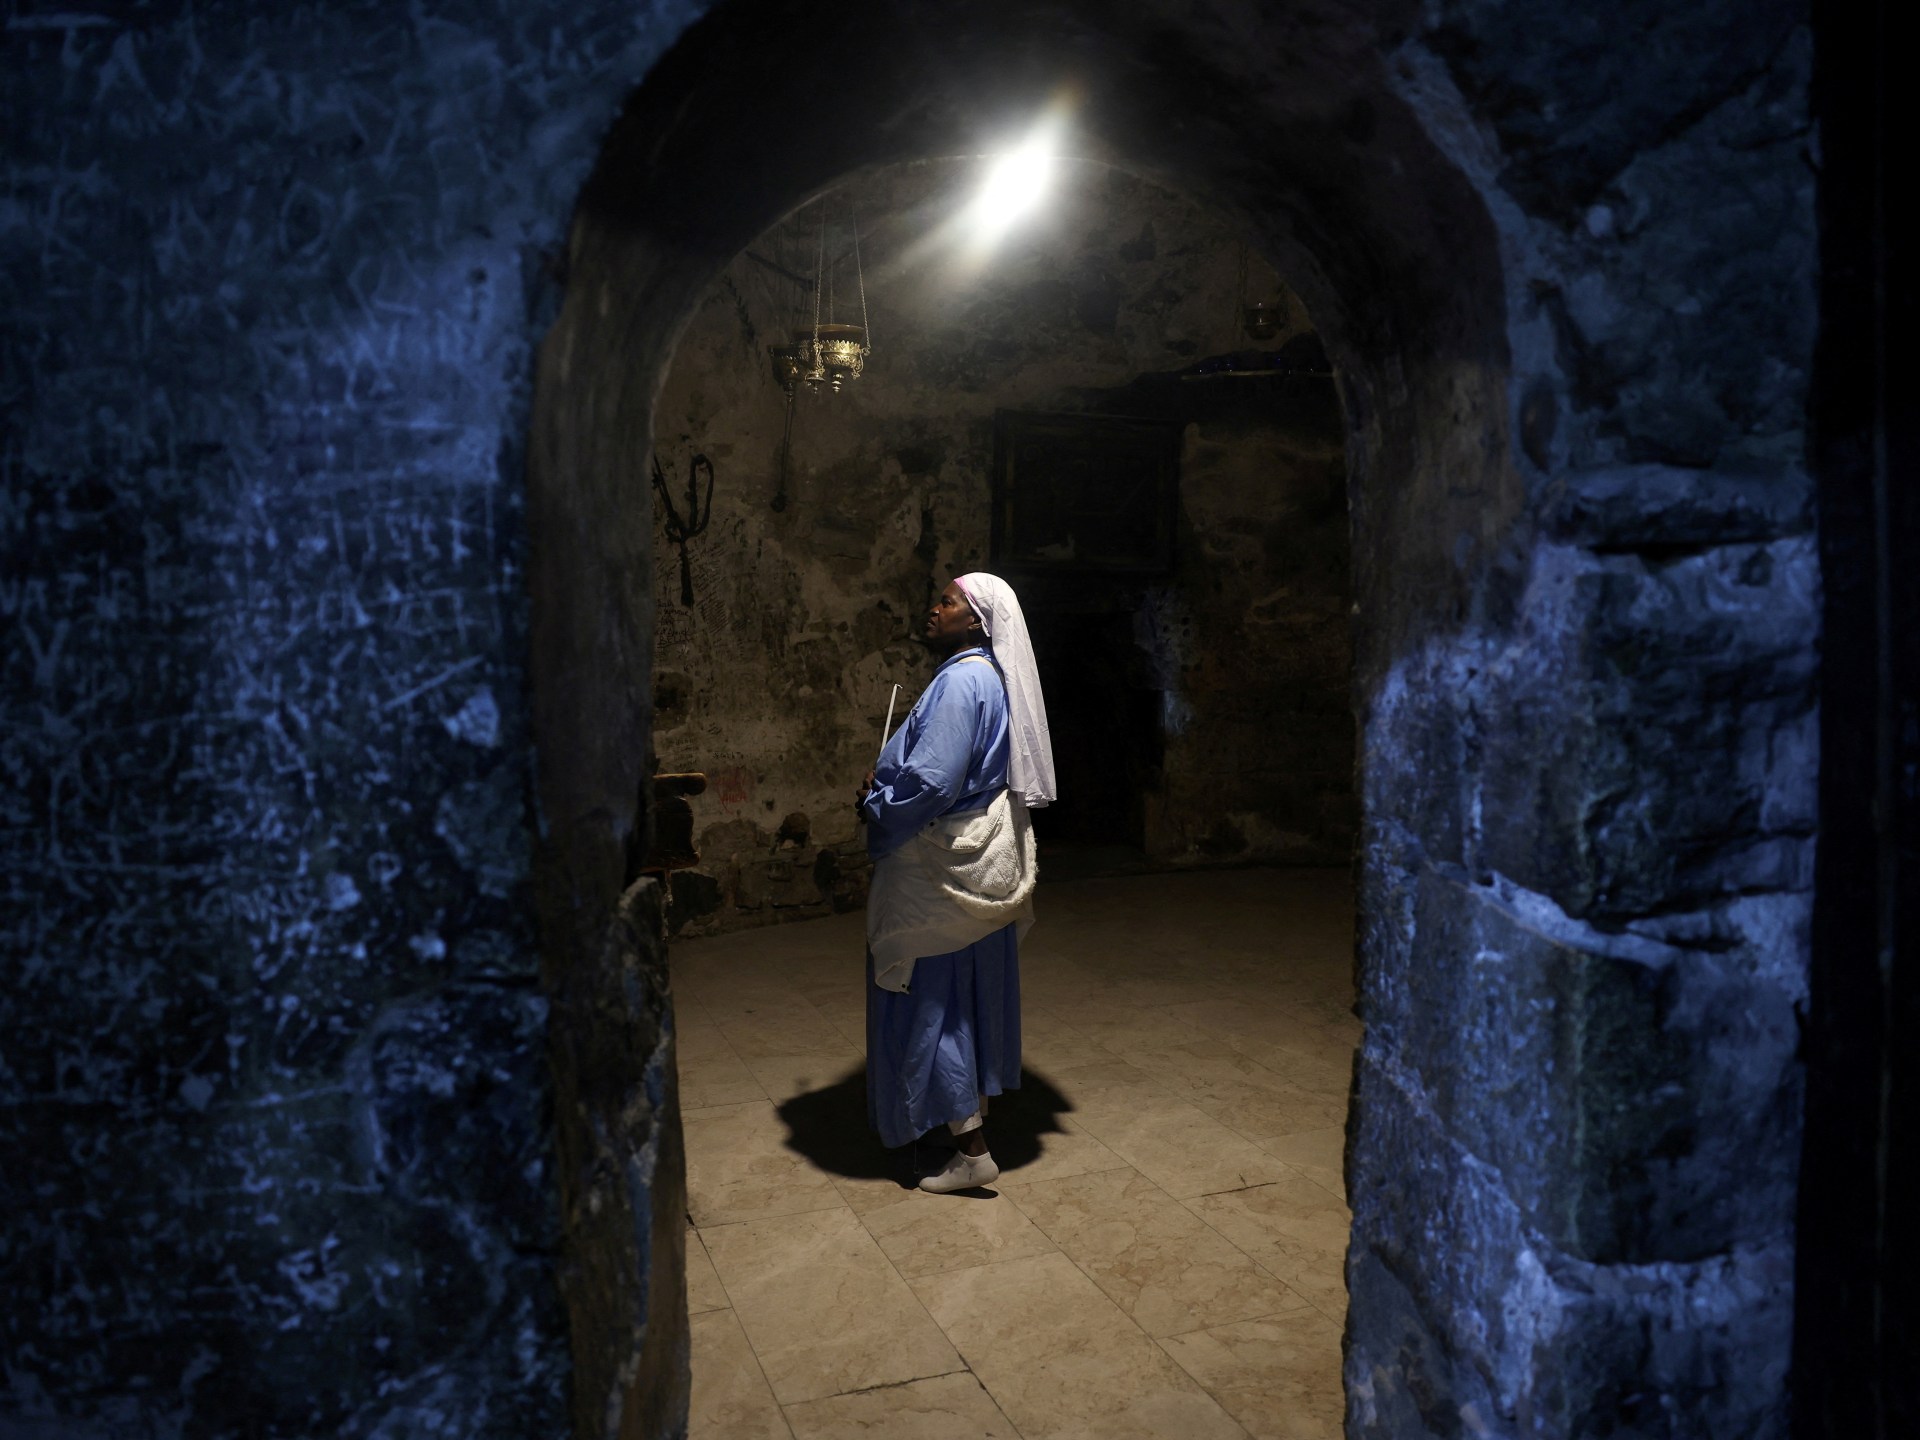 Palestinian Christians barred from Jerusalem’s Old City at Easter